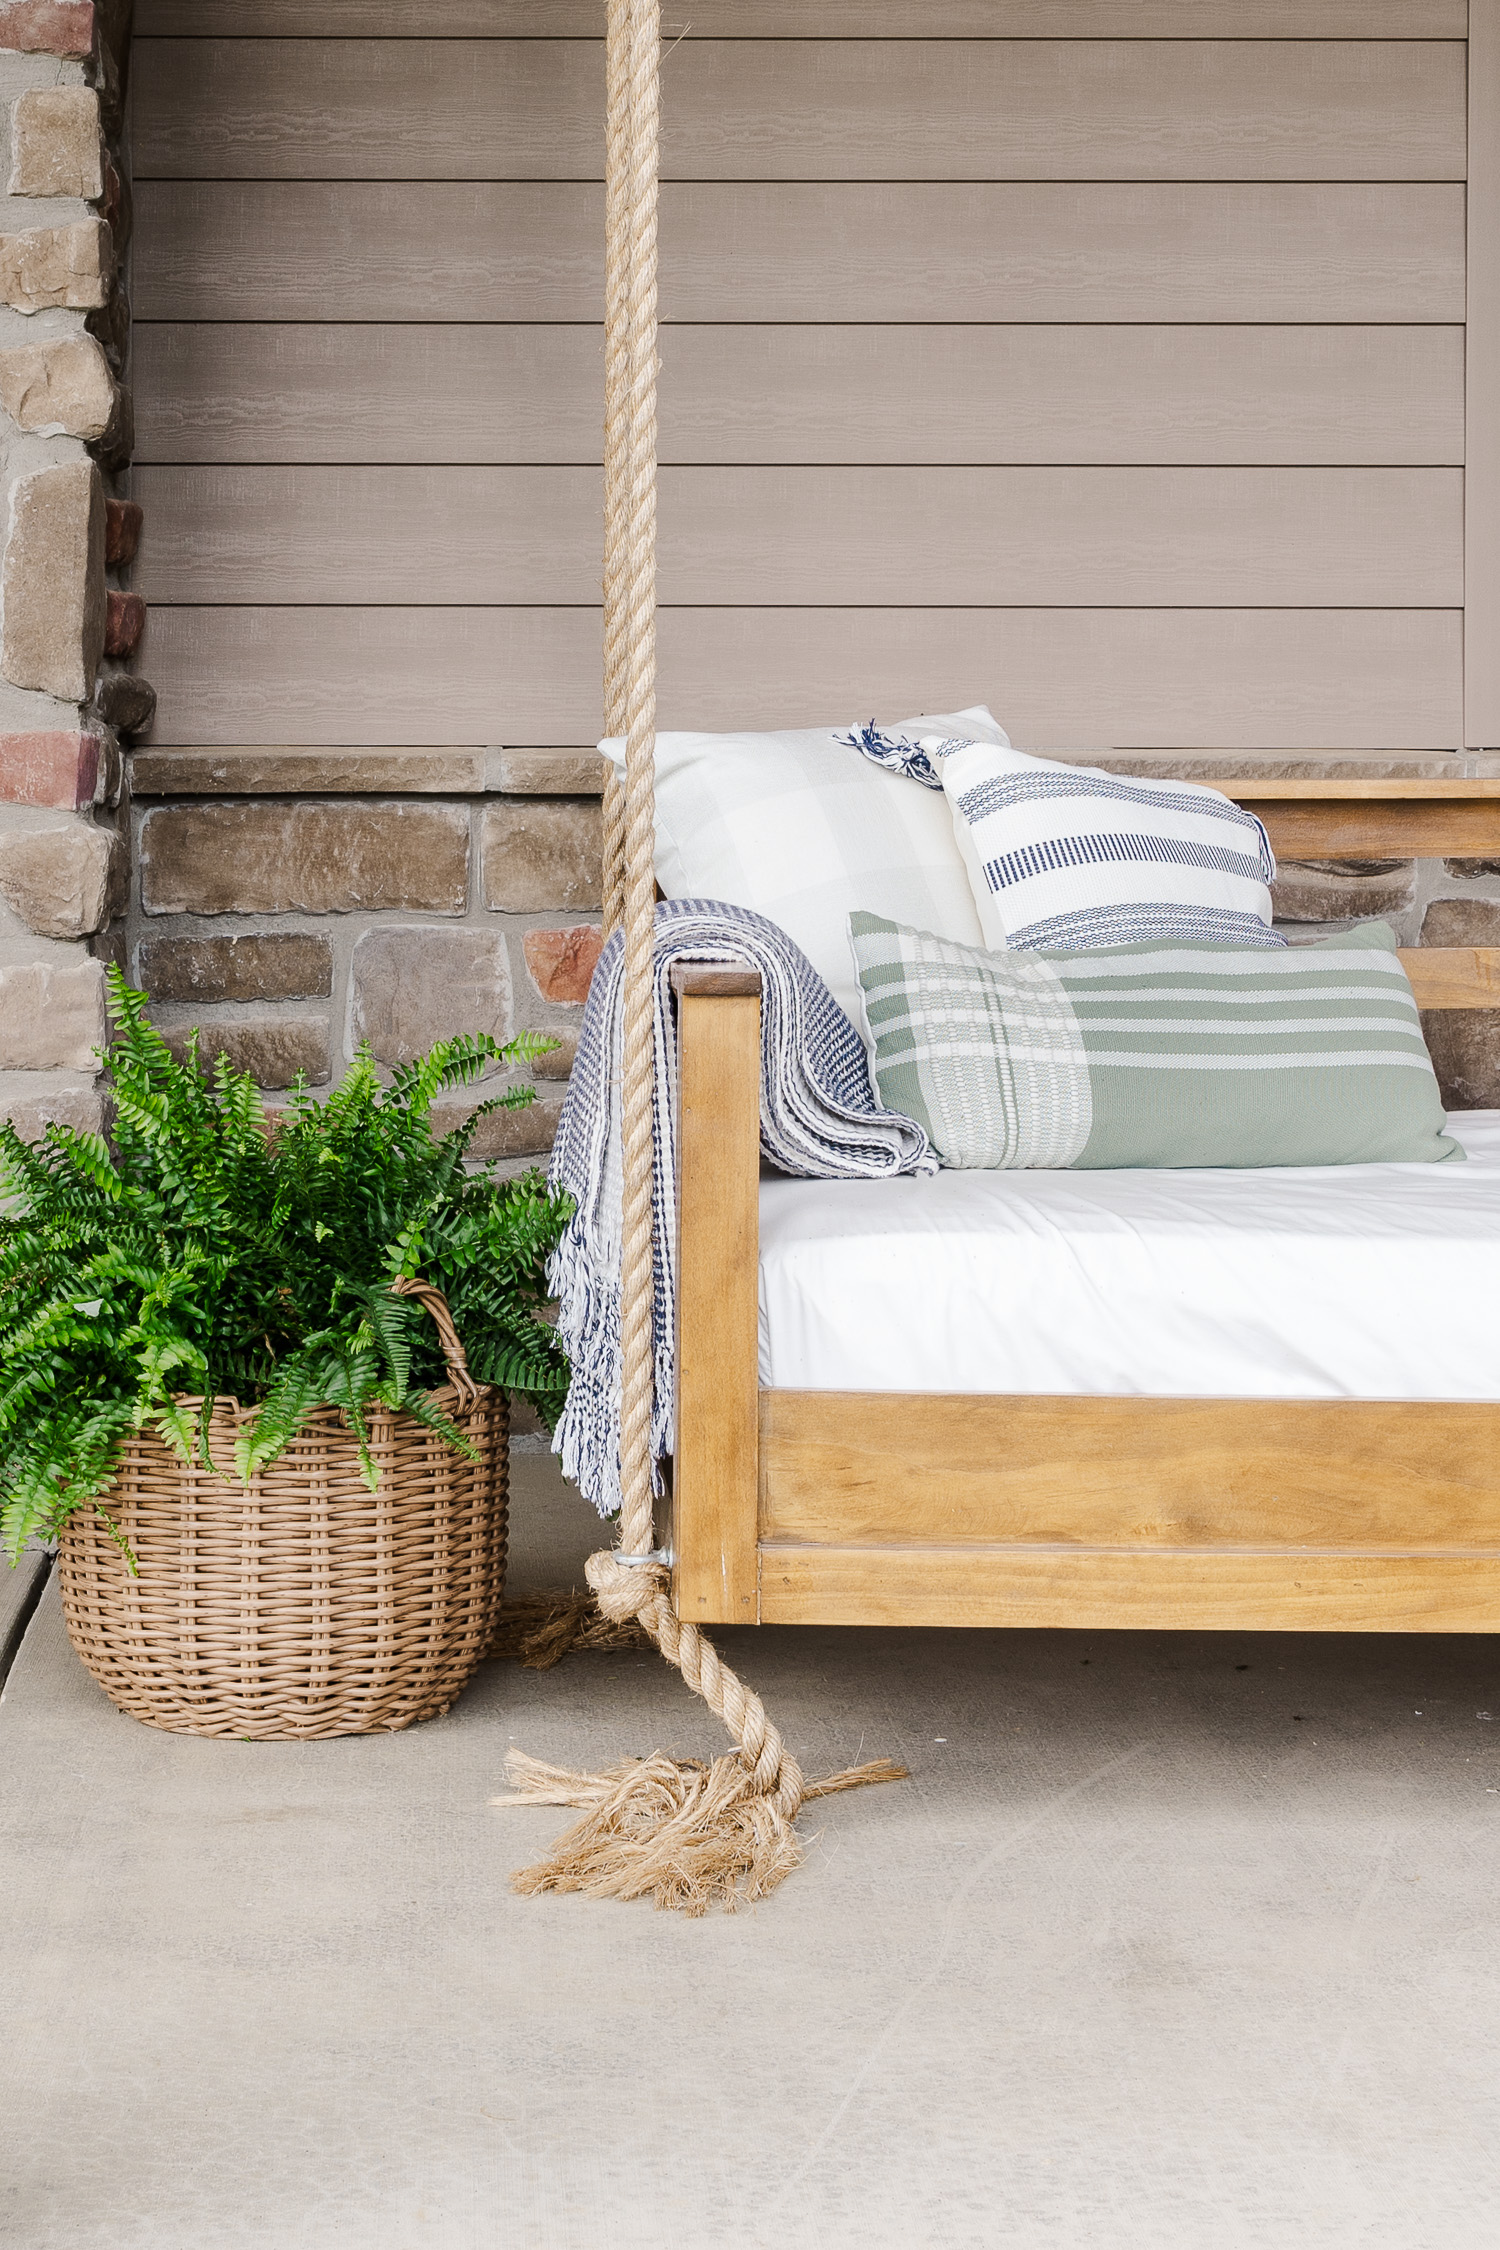 wood patio swing bed with fern in basket and pillows and blanket on swing